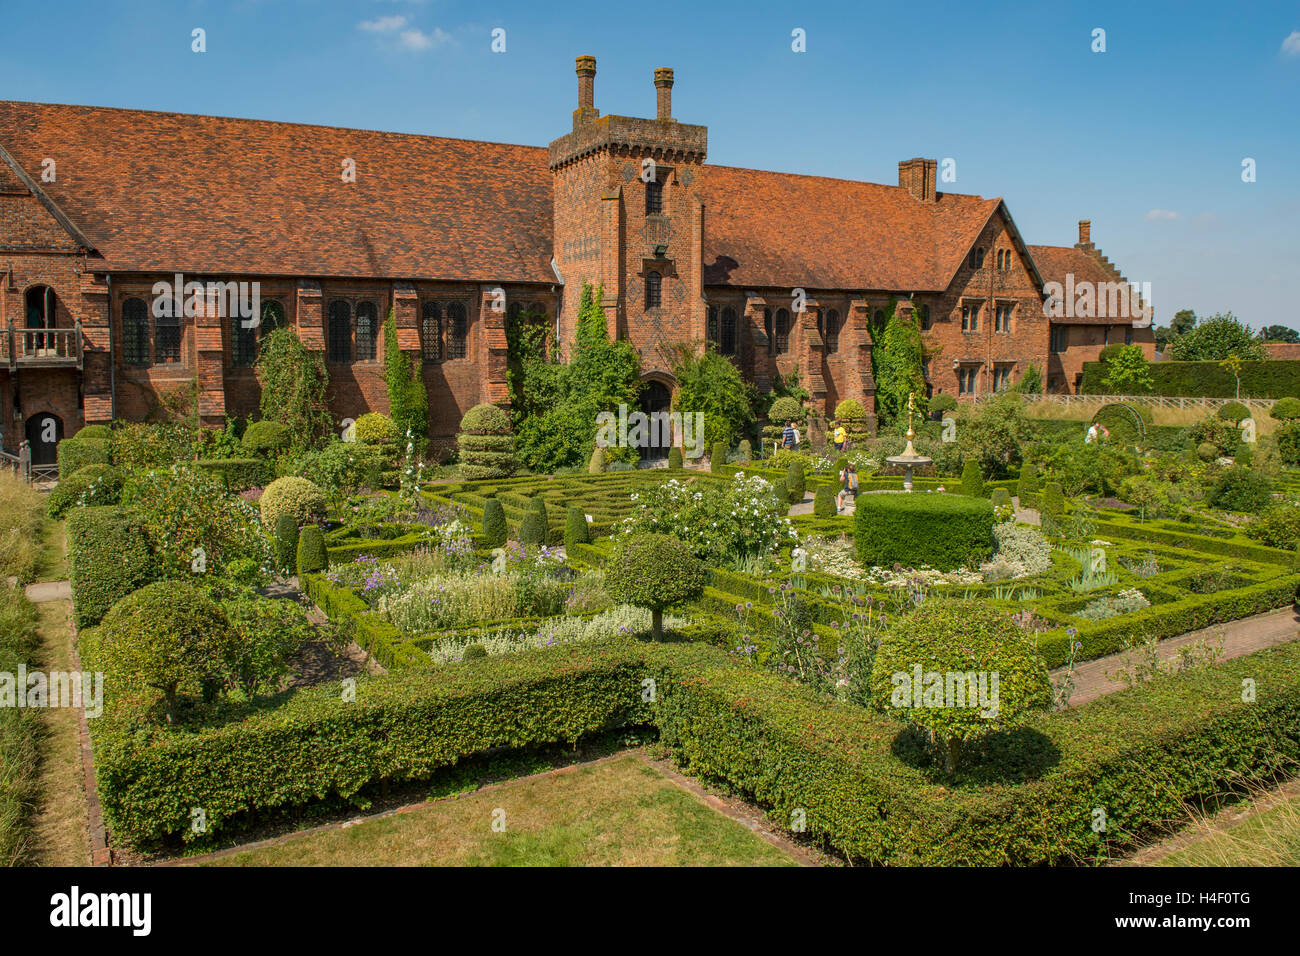 Formal Garden and Old Palace, Hatfield, Hertfordshire, England Stock Photo